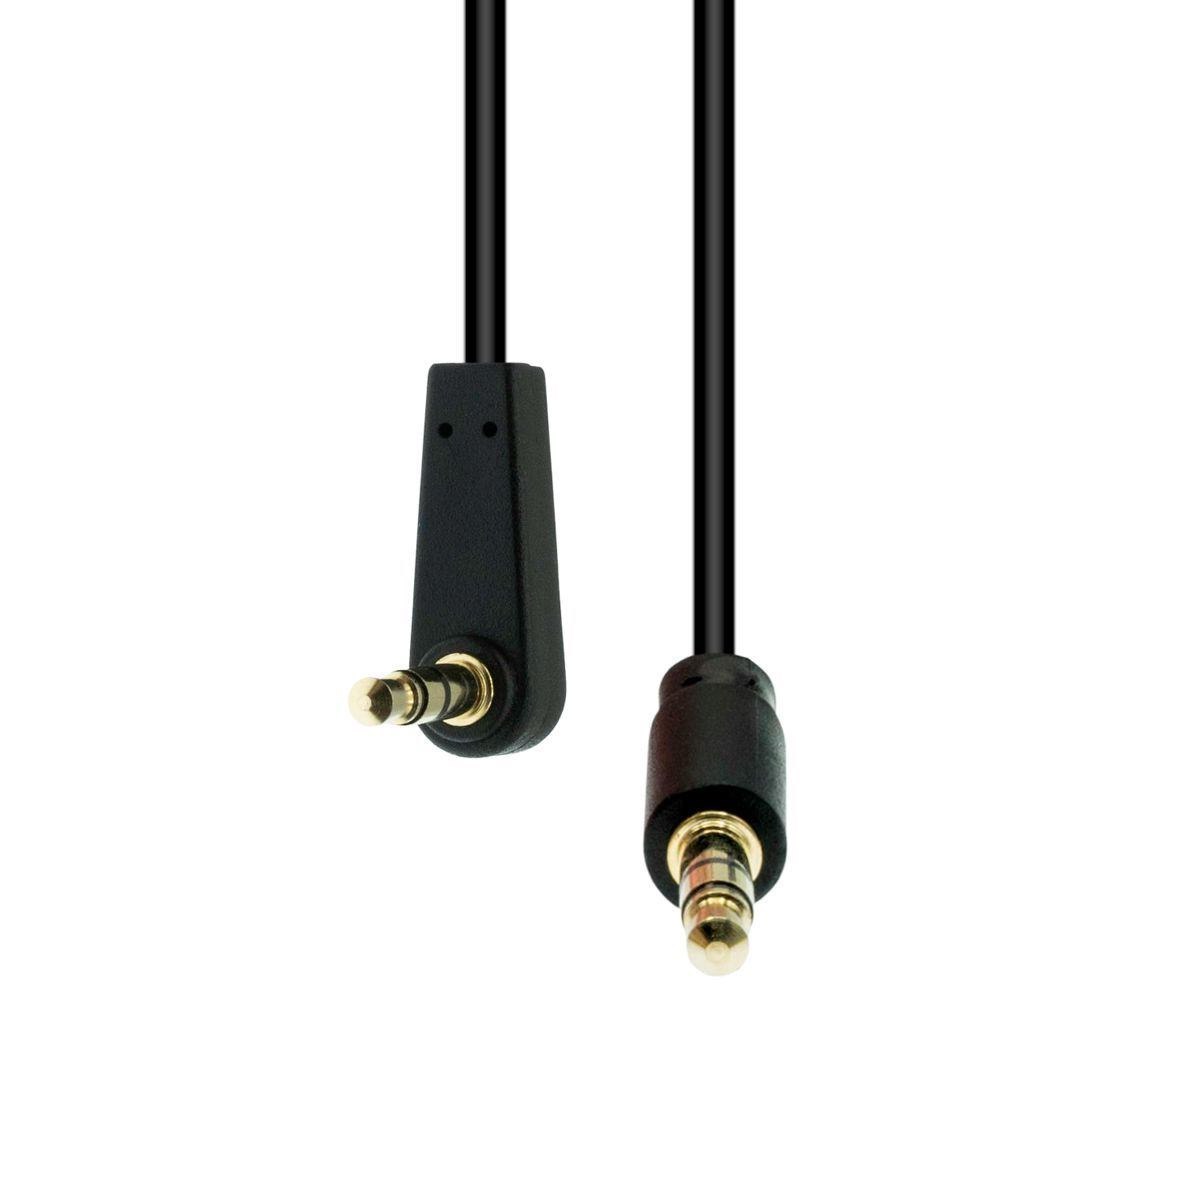 ProXtend 3-Pin Angled Slim Cable M-M - Black 1.5M - Warranty: 360M